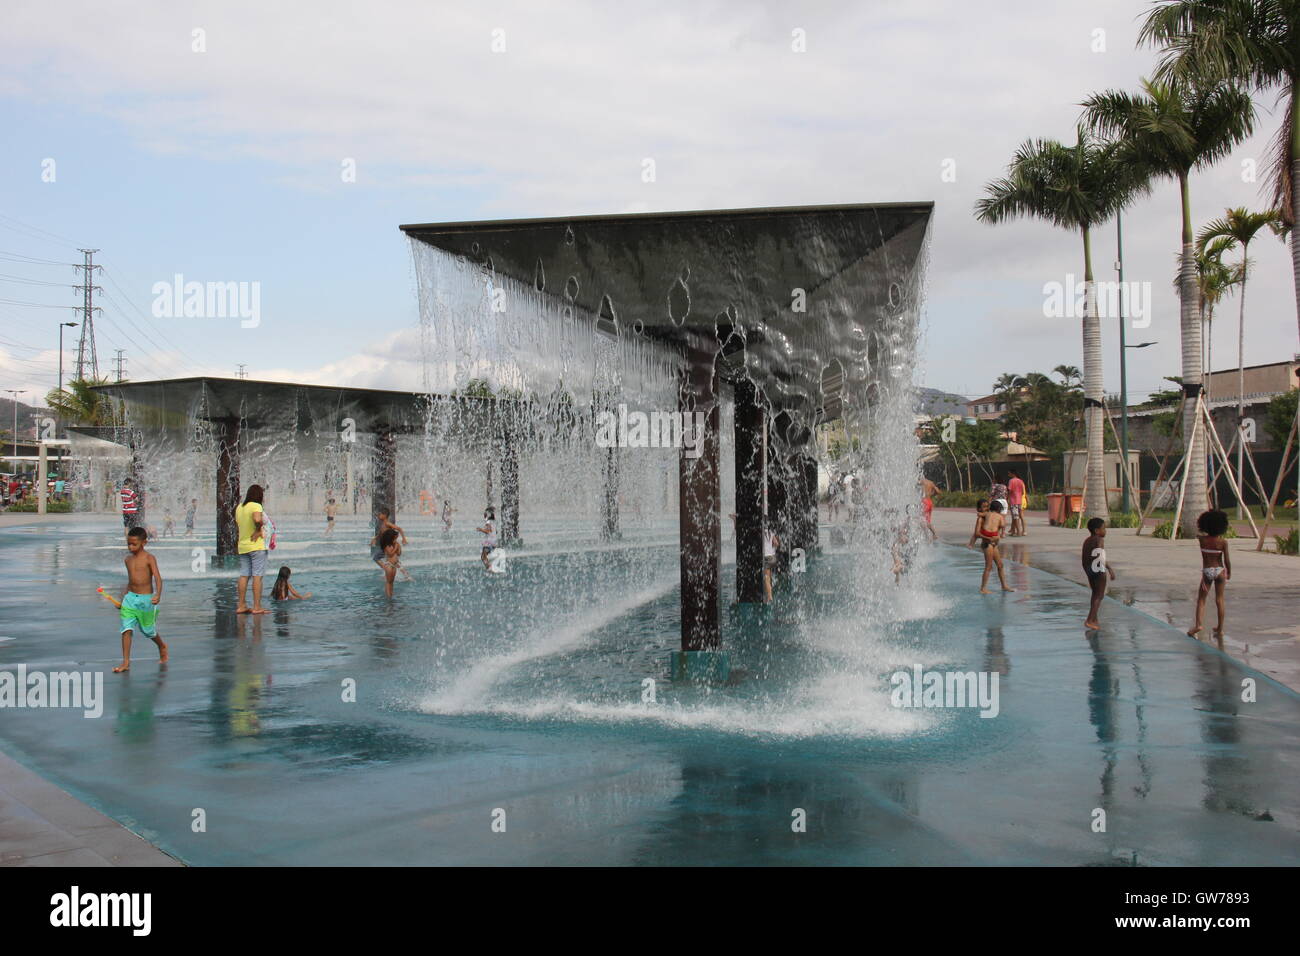 Children have fun in the water cascades of Madureira Park. The Madureira Park is the third largest leisure area of the city of Rio de Janeiro. The site, which is built on the banks of the railway line that crosses several suburban neighborhoods of Rio and is a poor area of the city. The site was recently expanded and gained new services such as tennis courts for free use, new bike paths and new areas of leisure and entertainment. On site we highlight the artificial lakes made in the shape and colors of the Olympic Rings and also the 'artificial beaches' where water cascades make the joy of chi Stock Photo